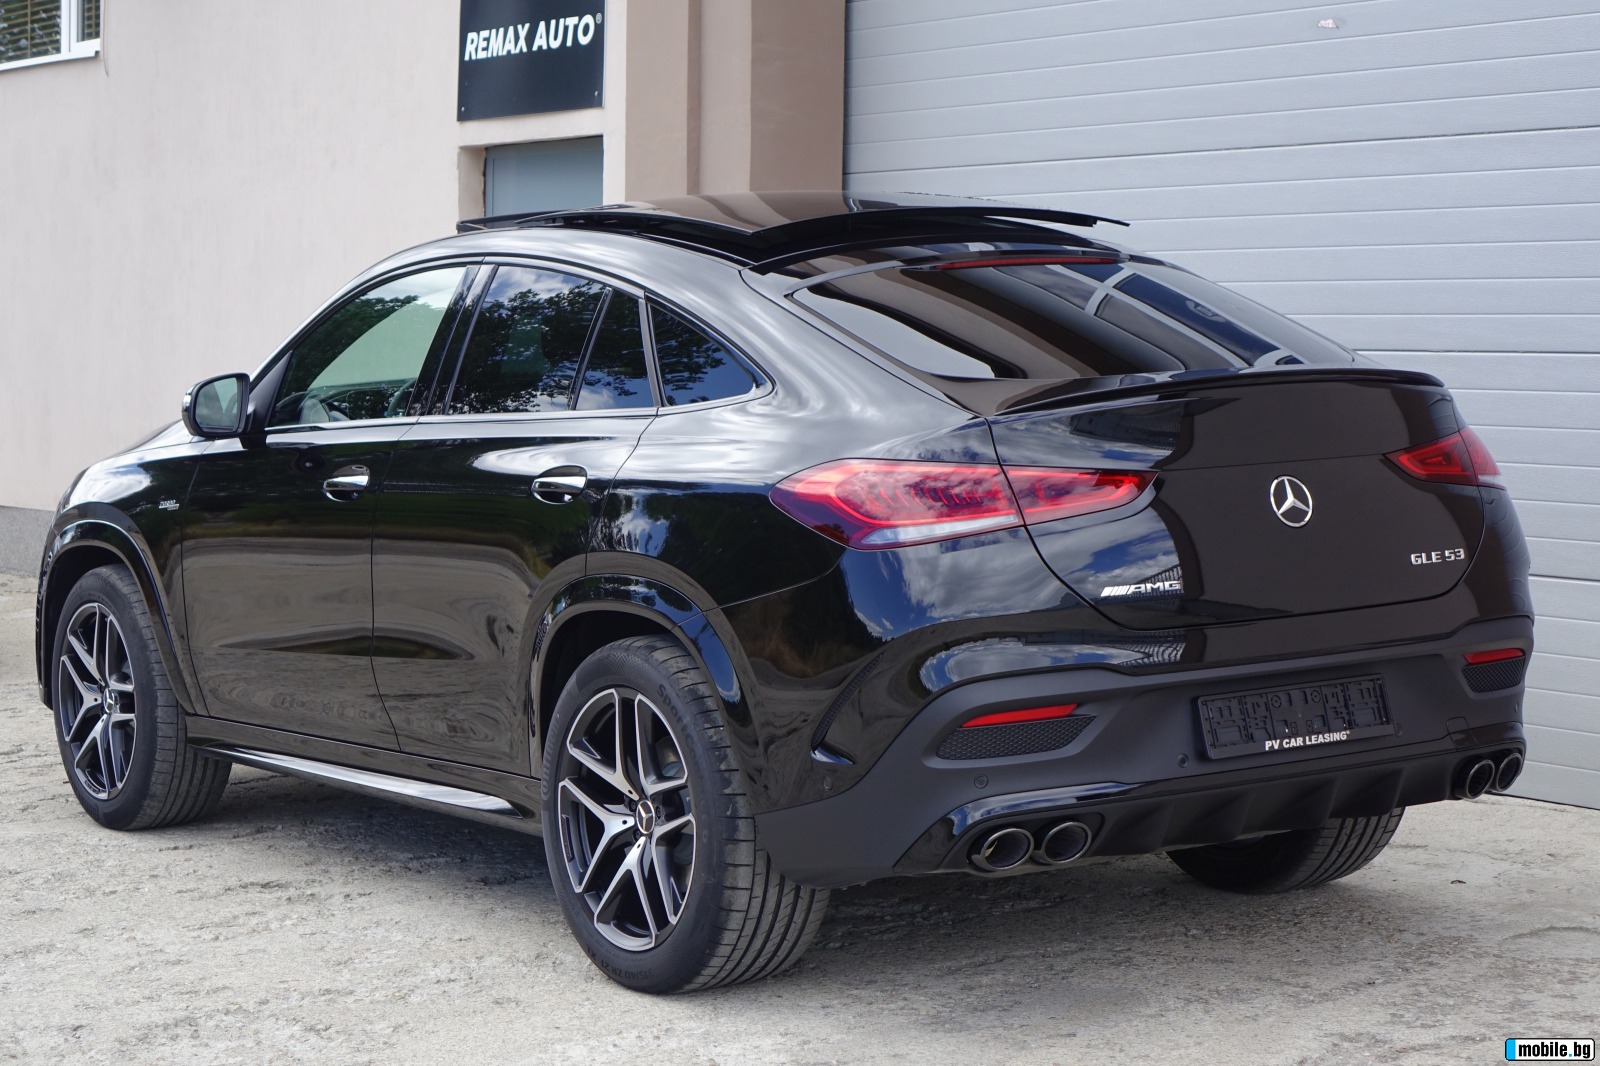 Mercedes-Benz GLE 53 4MATIC + COUPE | Mobile.bg   6